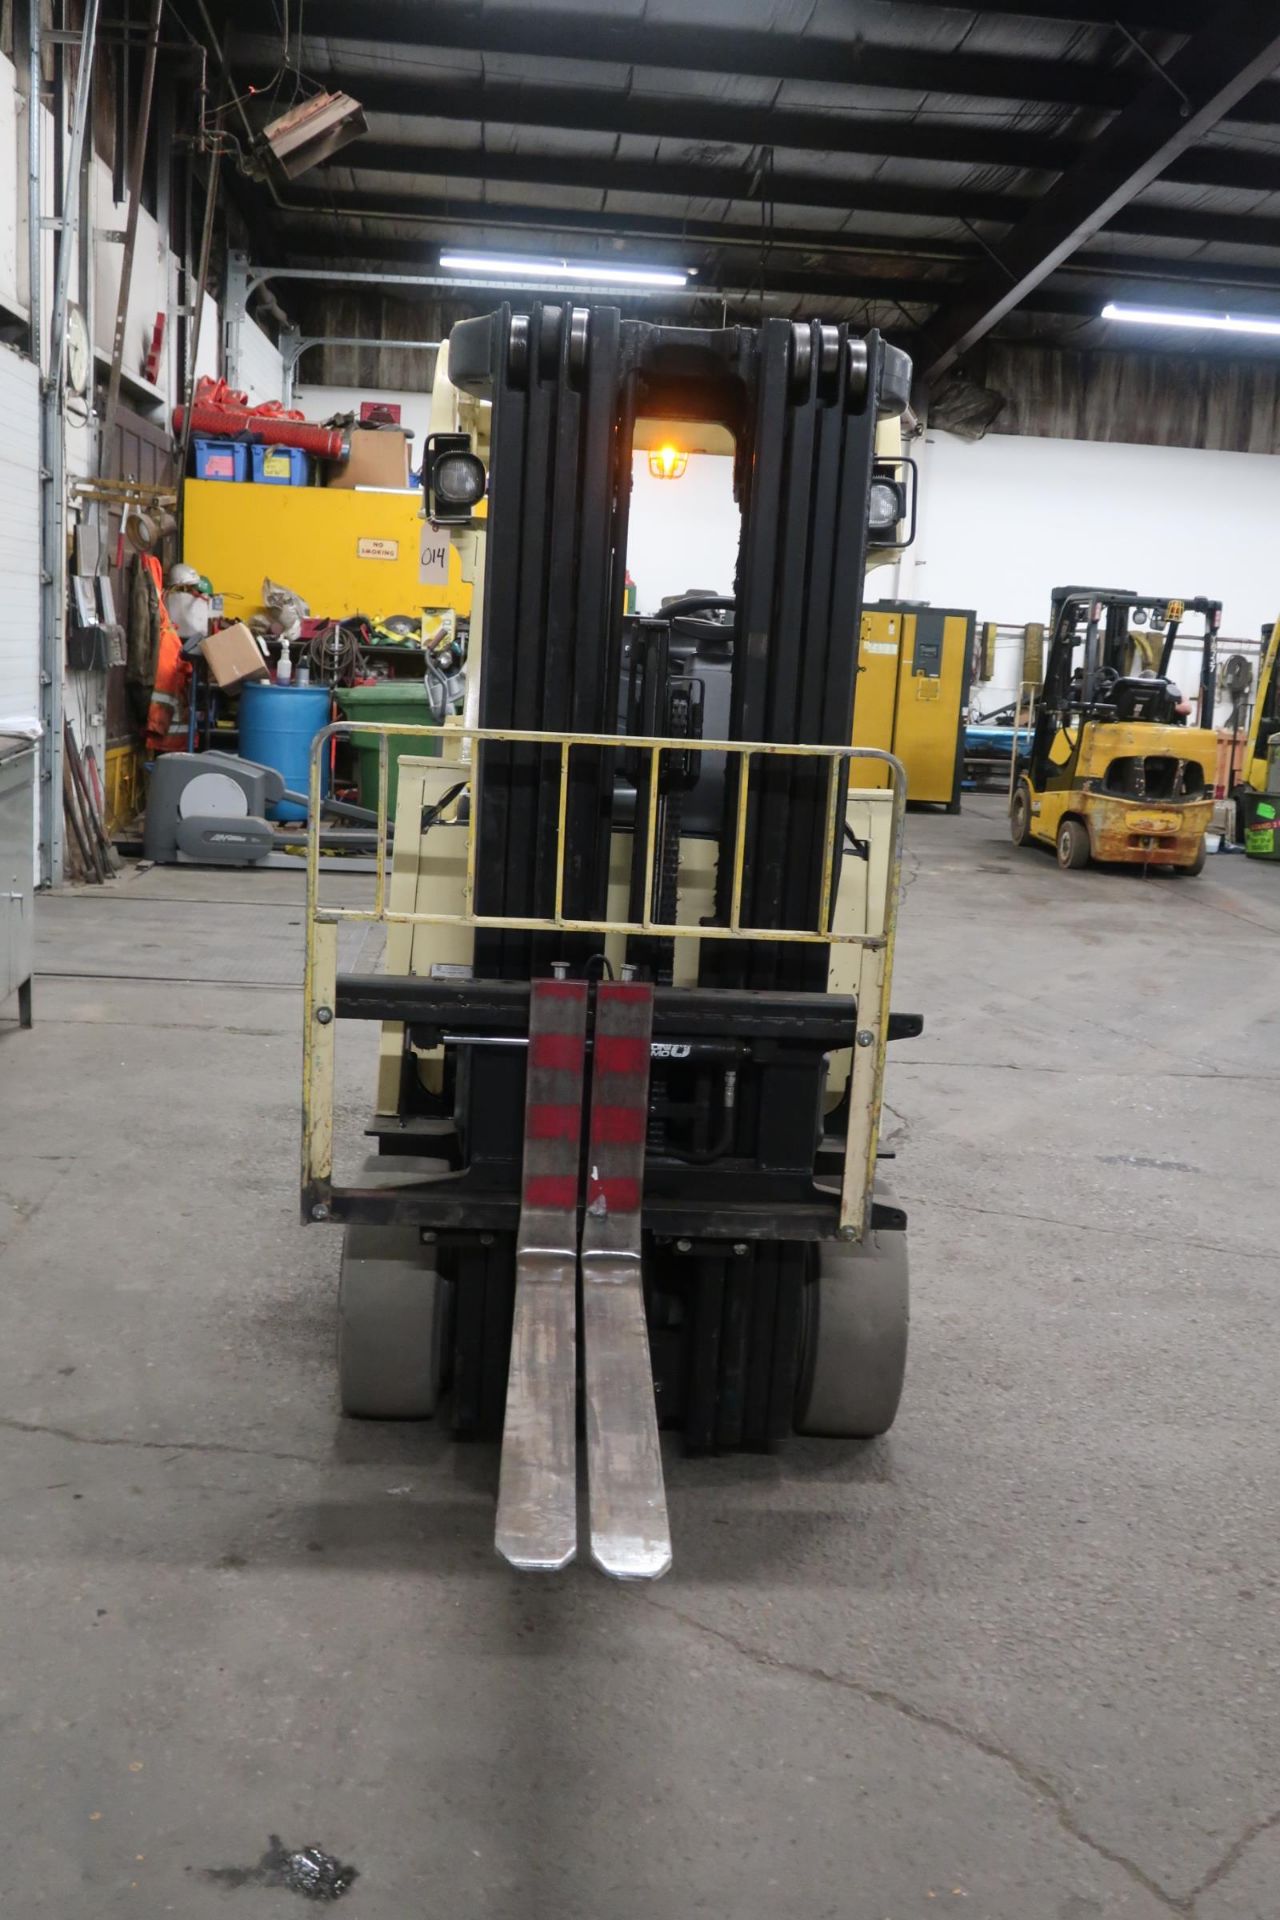 FREE CUSTOMS - 2014 Hyster 5000lbs Capacity Forklift with 4-stage mast - electric with sideshift - Image 3 of 3